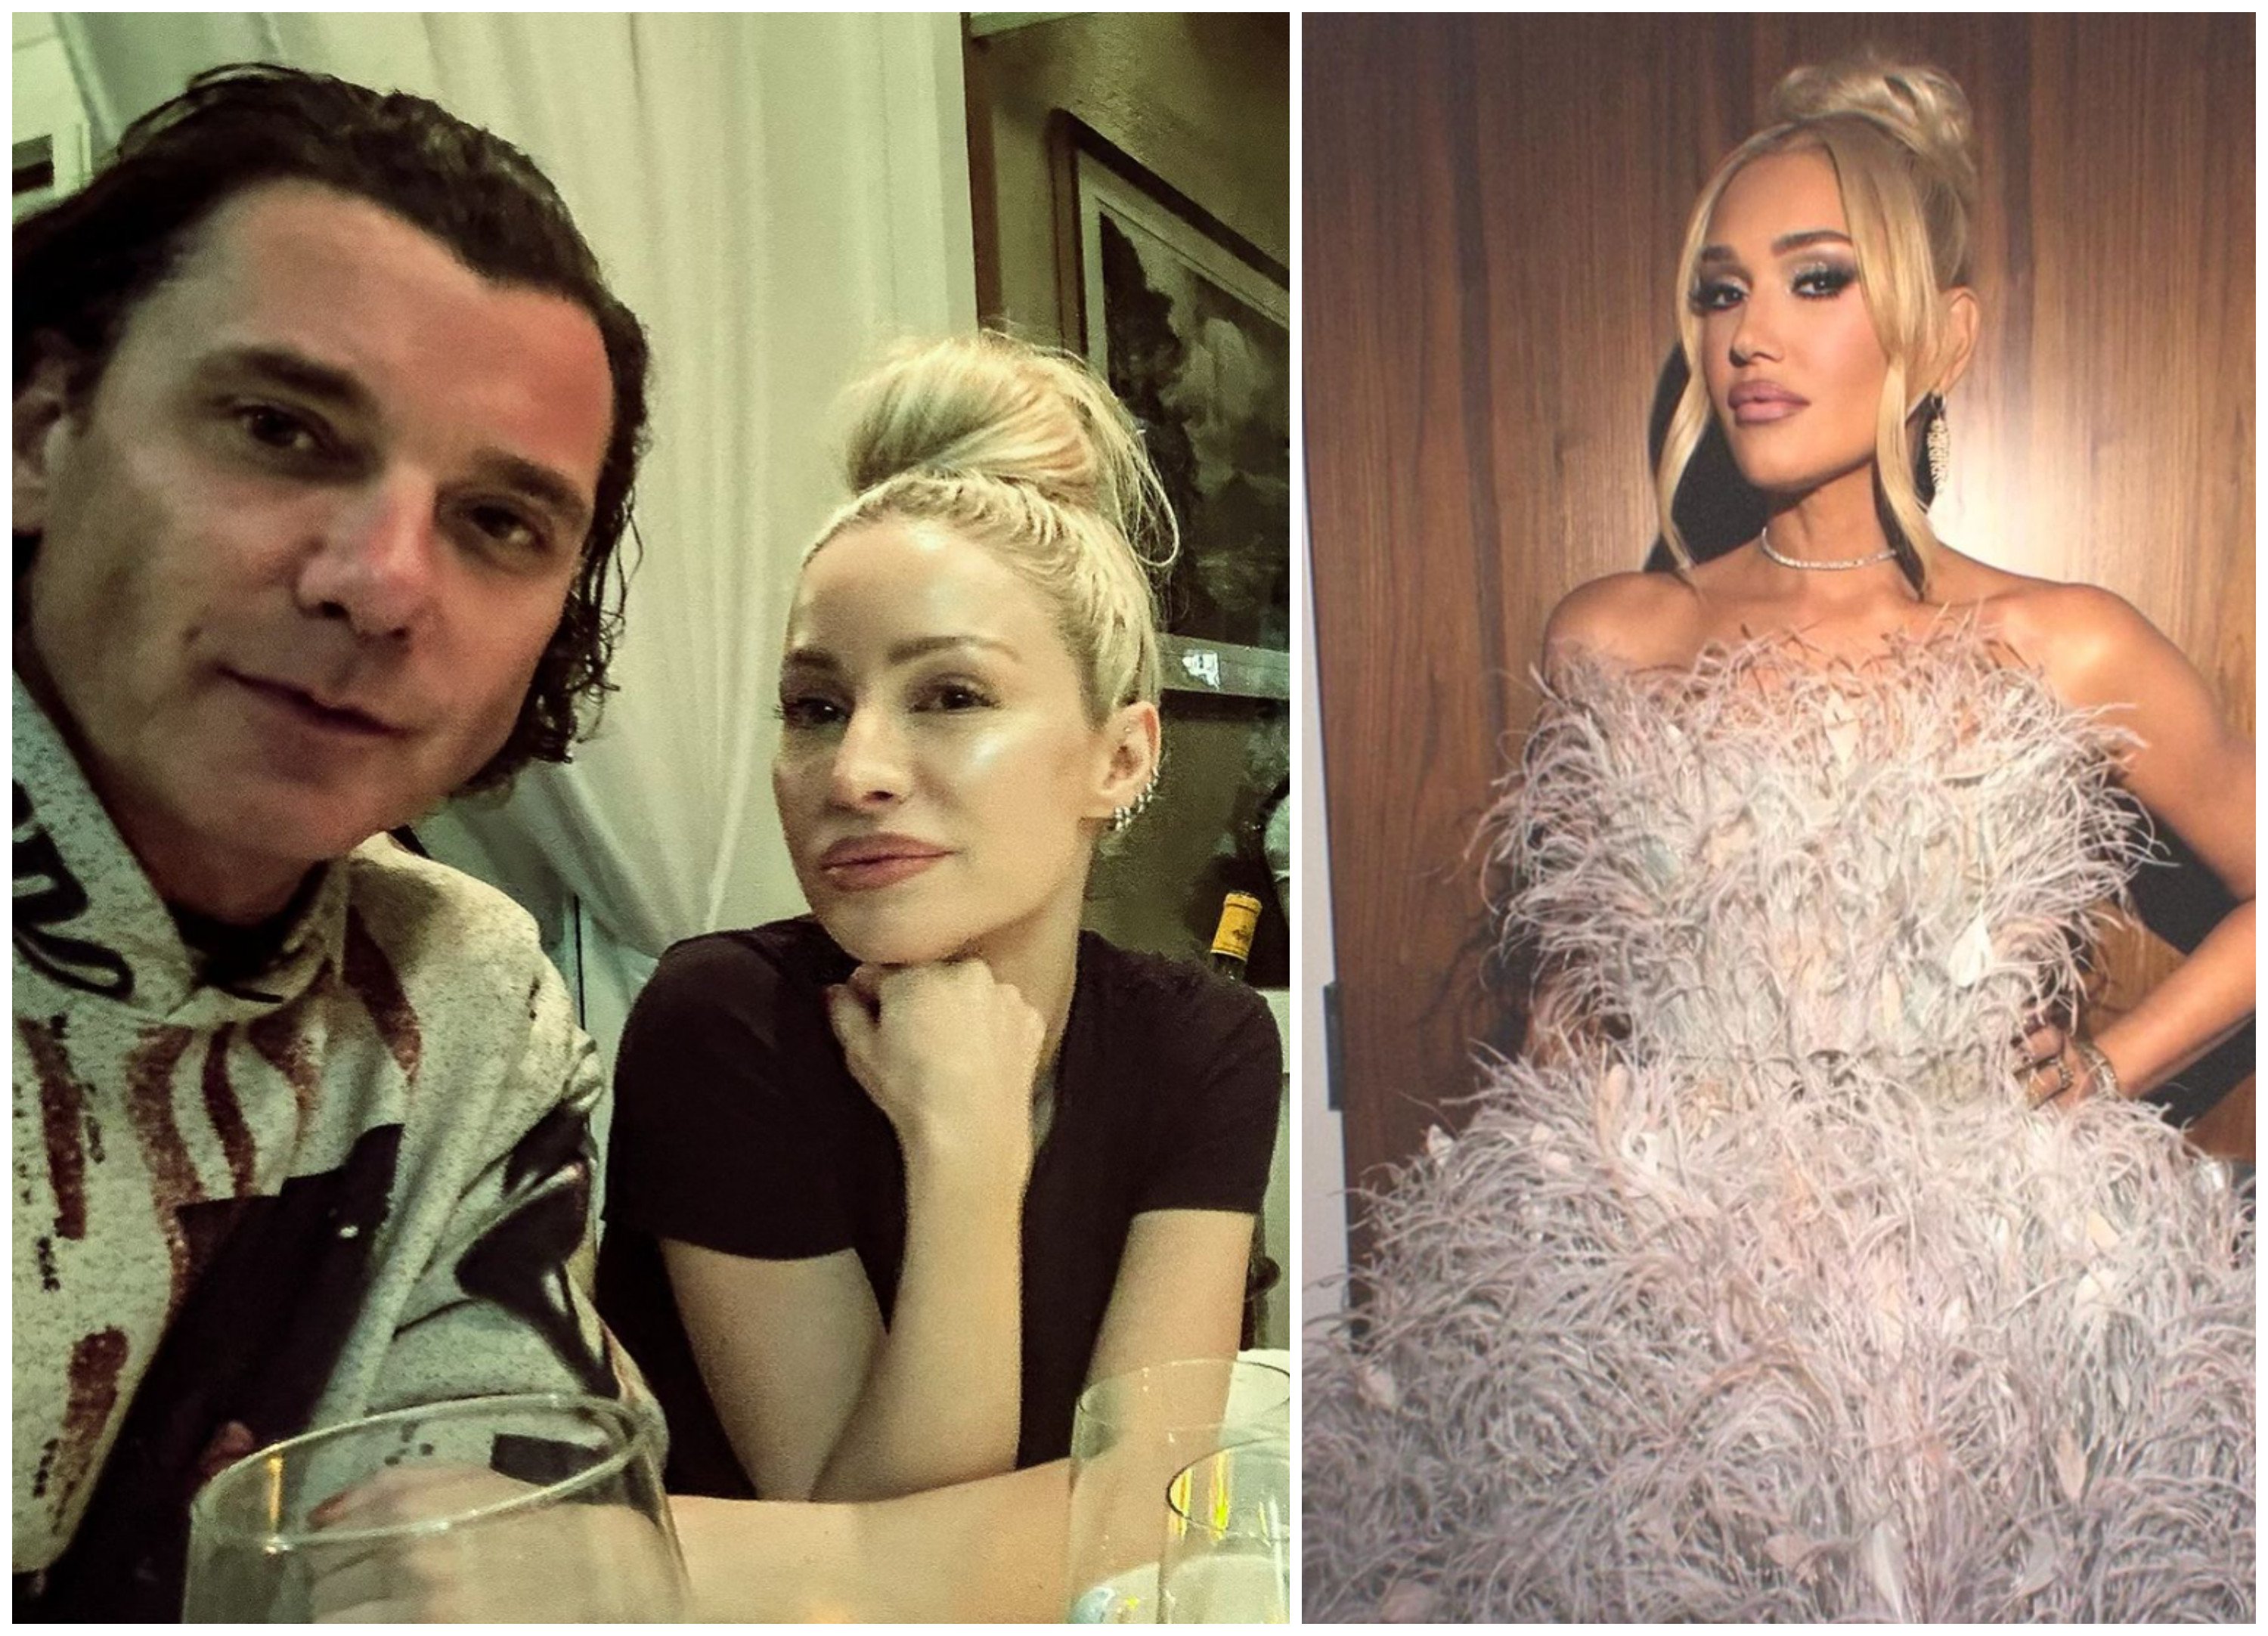 Gavin Rossdale’s new girlfriend Xhoana X (pictured) has been compared to his ex, Gwen Stefani. Photos: @xhoana_x/Instagram